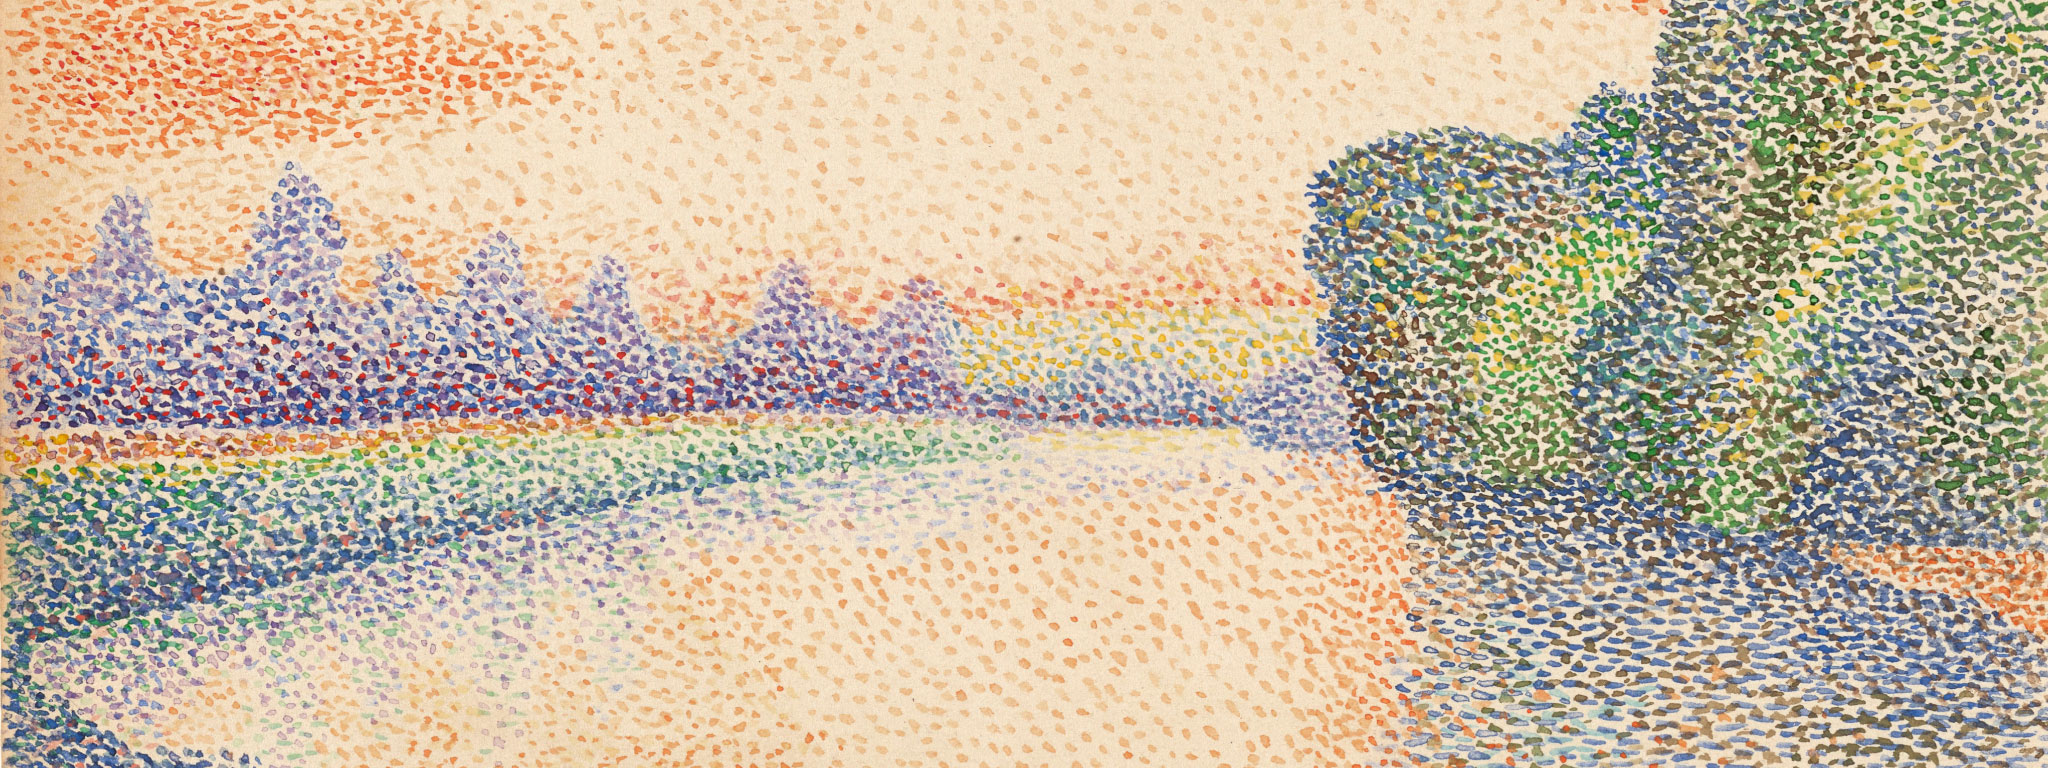 The Banks of the Marne at Dawn (detail), about 1888, Albert Dubois-Pillet. Watercolor over traces of black chalk. Getty Museum